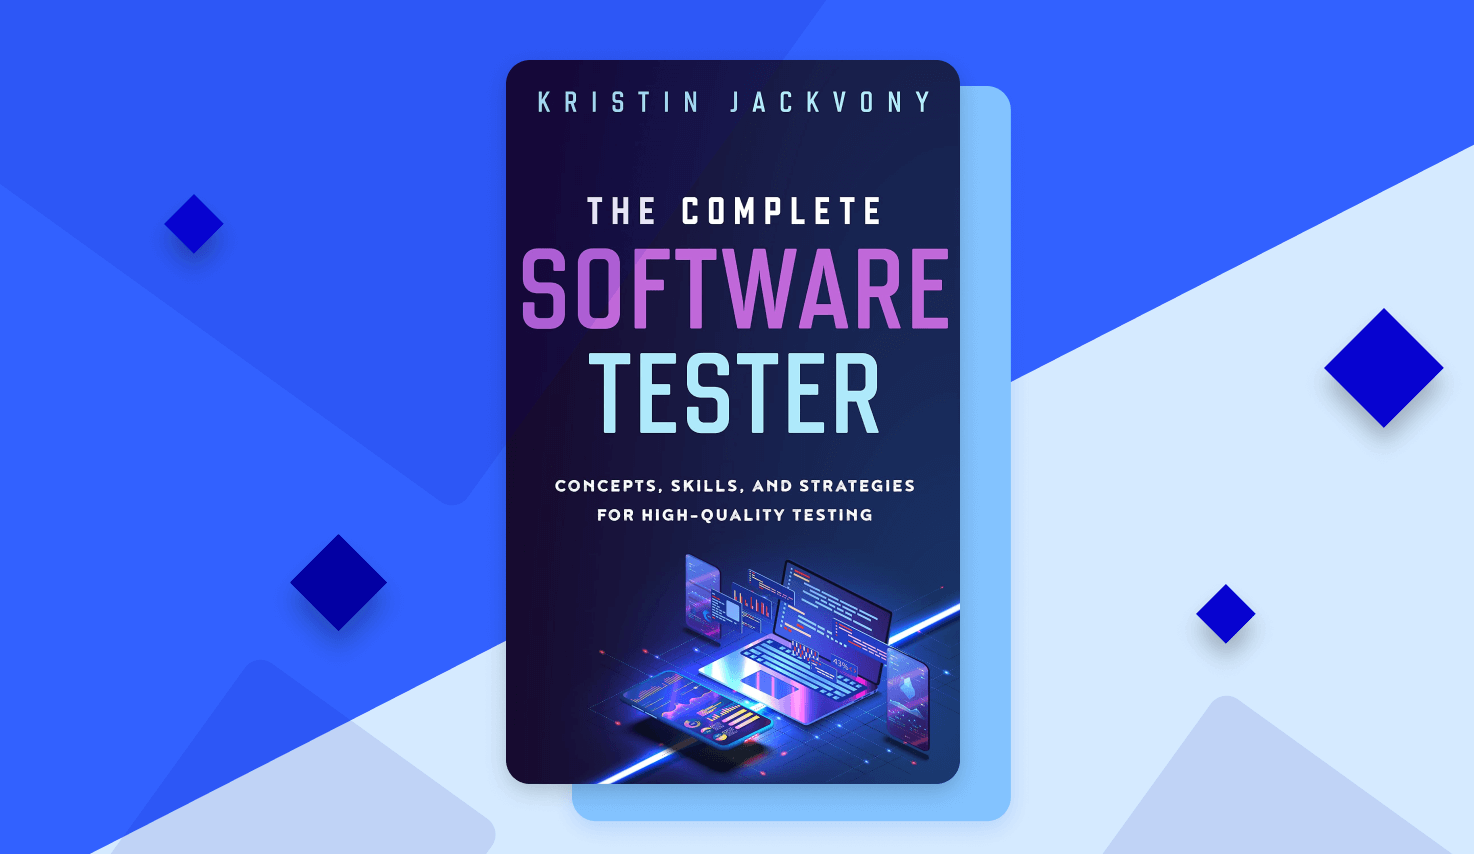 What Makes a Complete Software Tester?